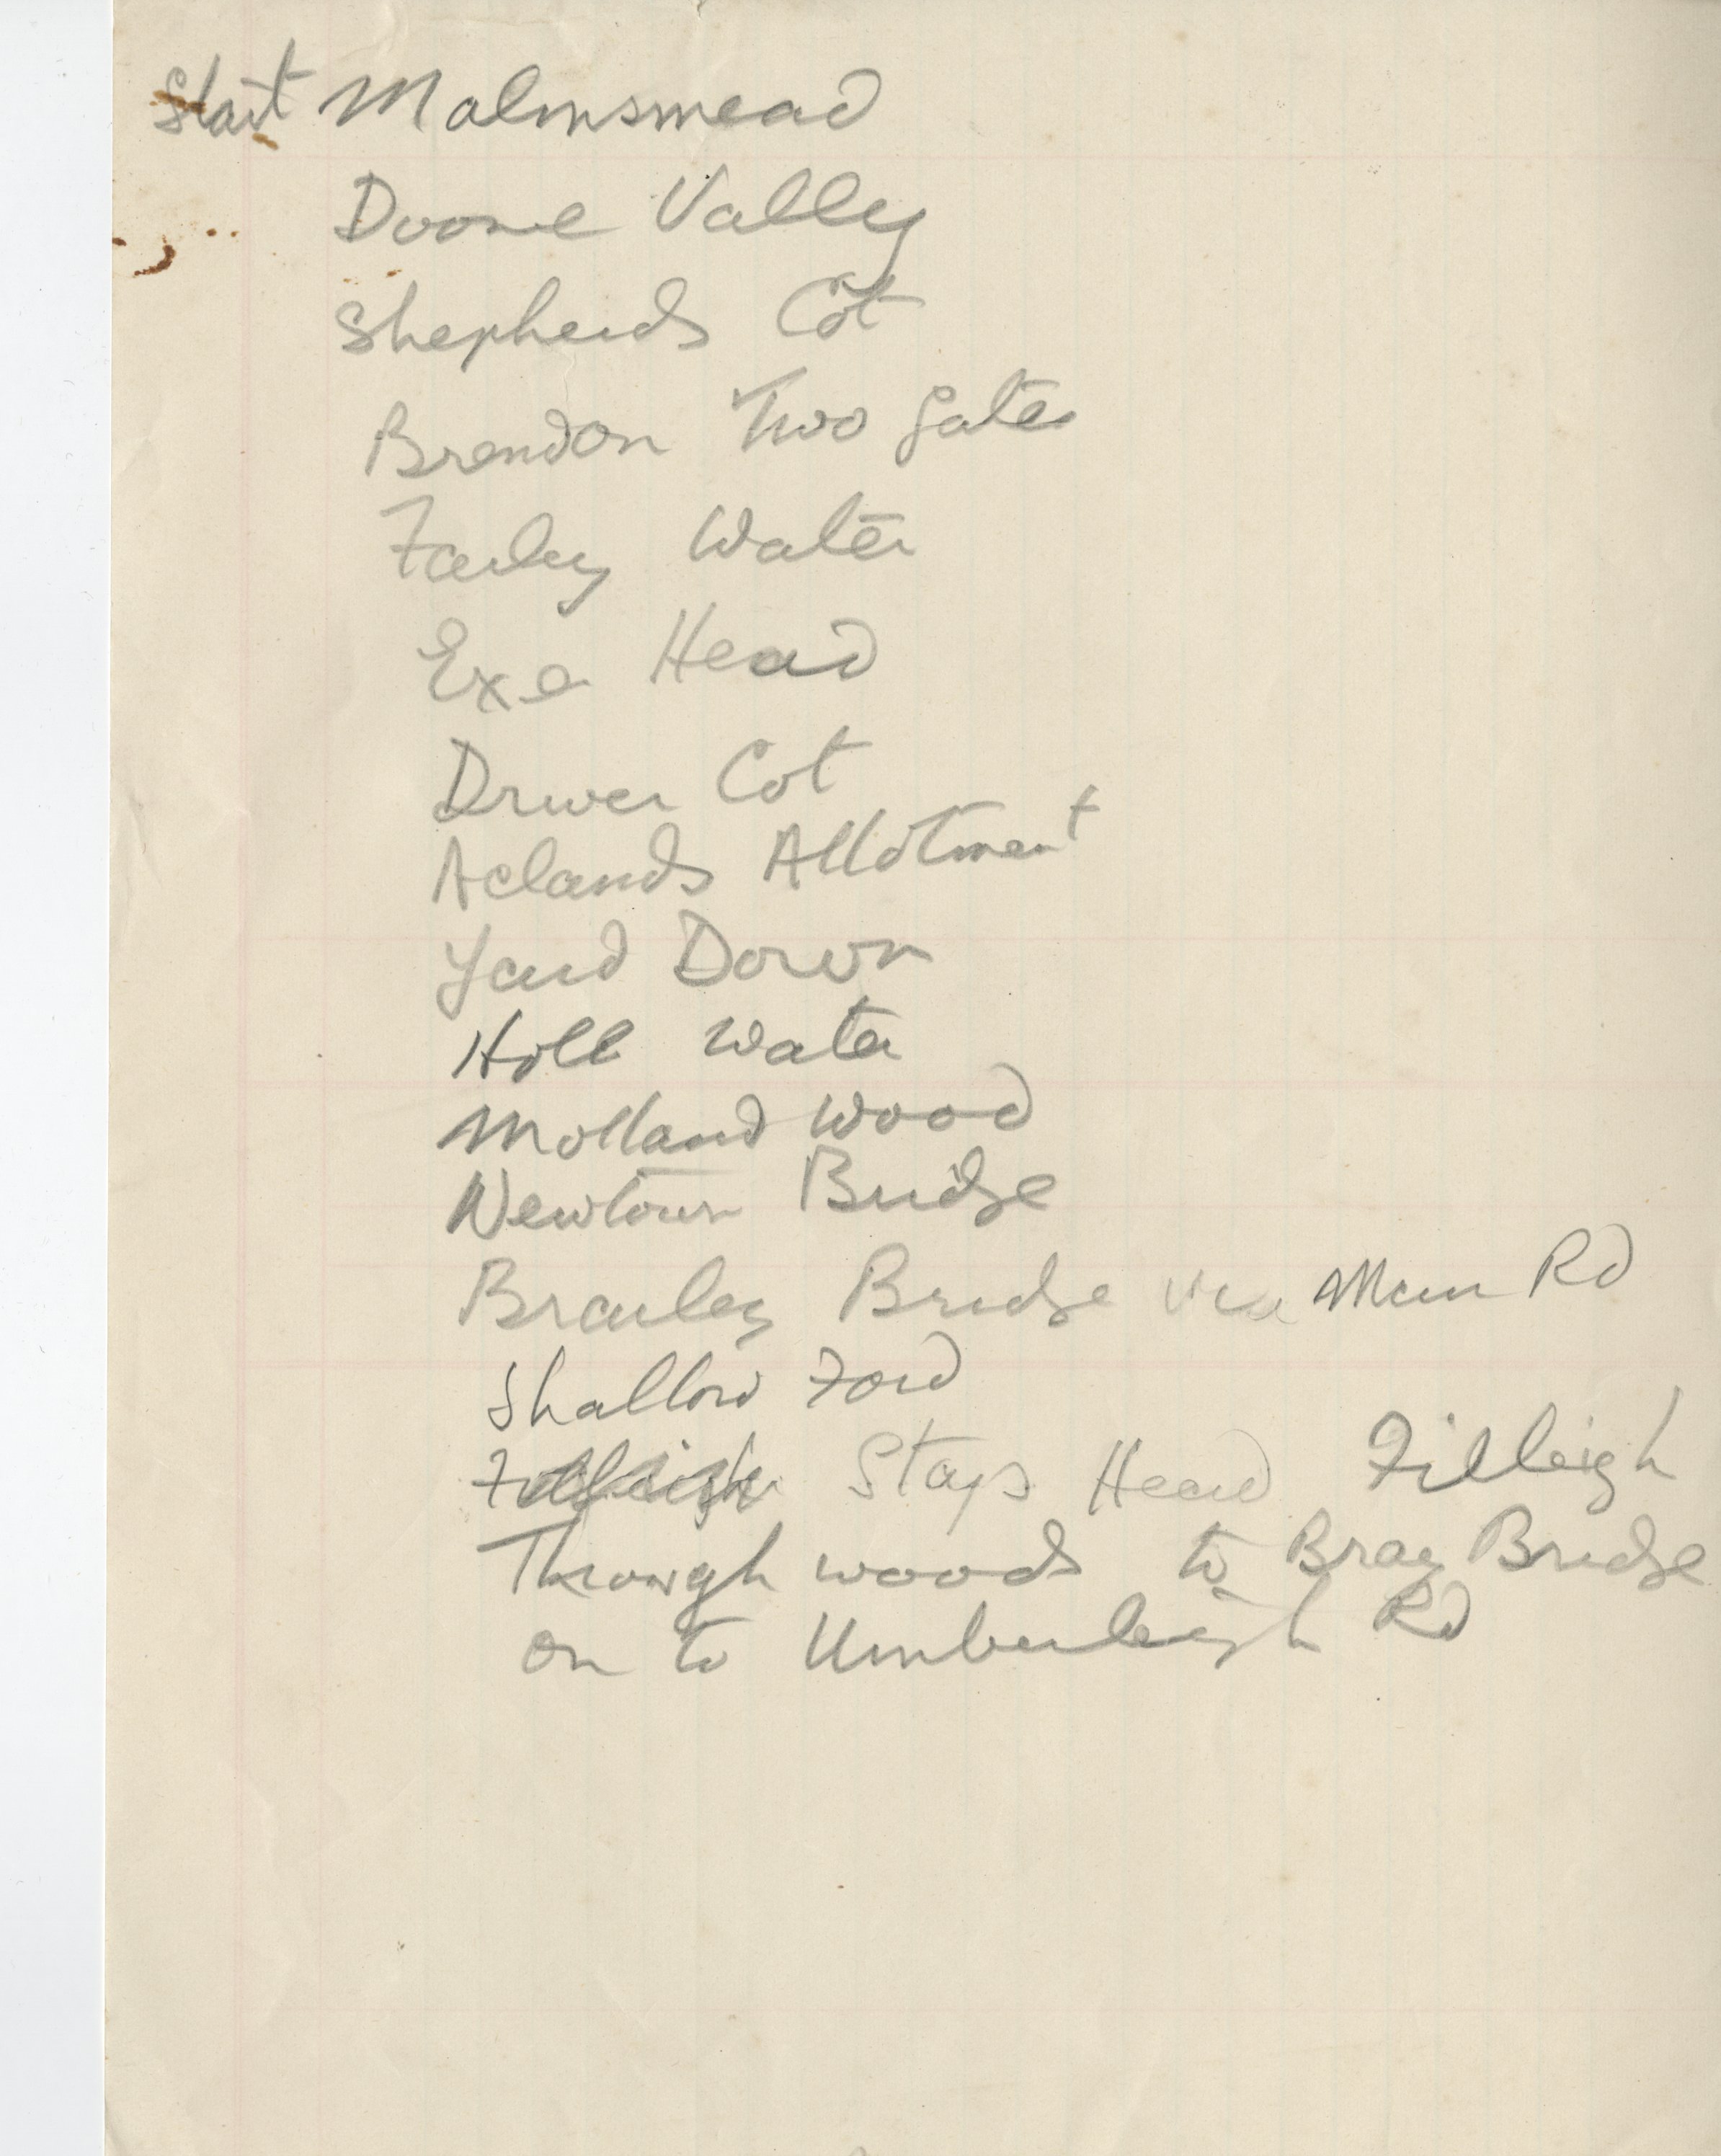 EUL MS 397/1041 Handwritten list of location points for the Golden Horseshoe Fifty Mile Ride